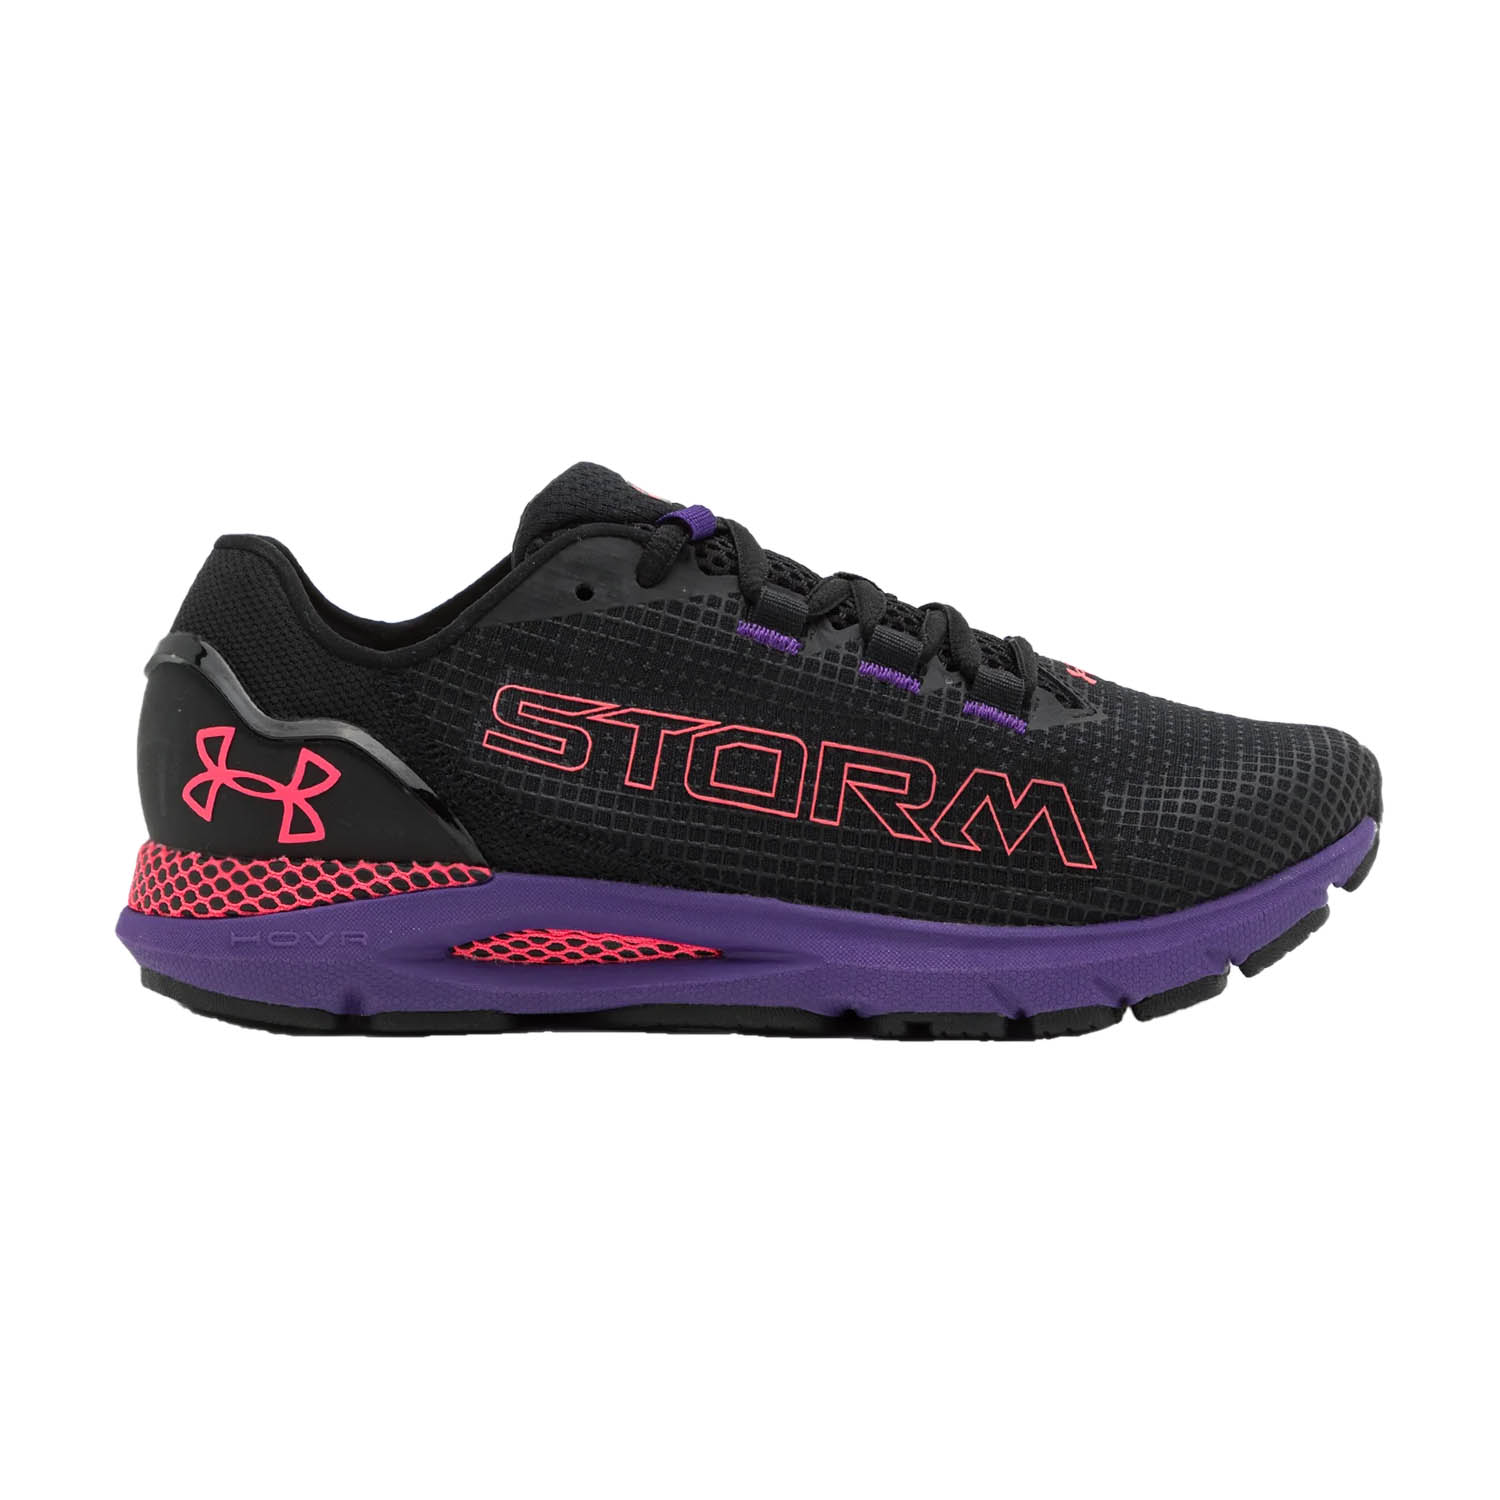 Under Armour HOVR Sonic 6 Storm Women's Running Shoes - Black